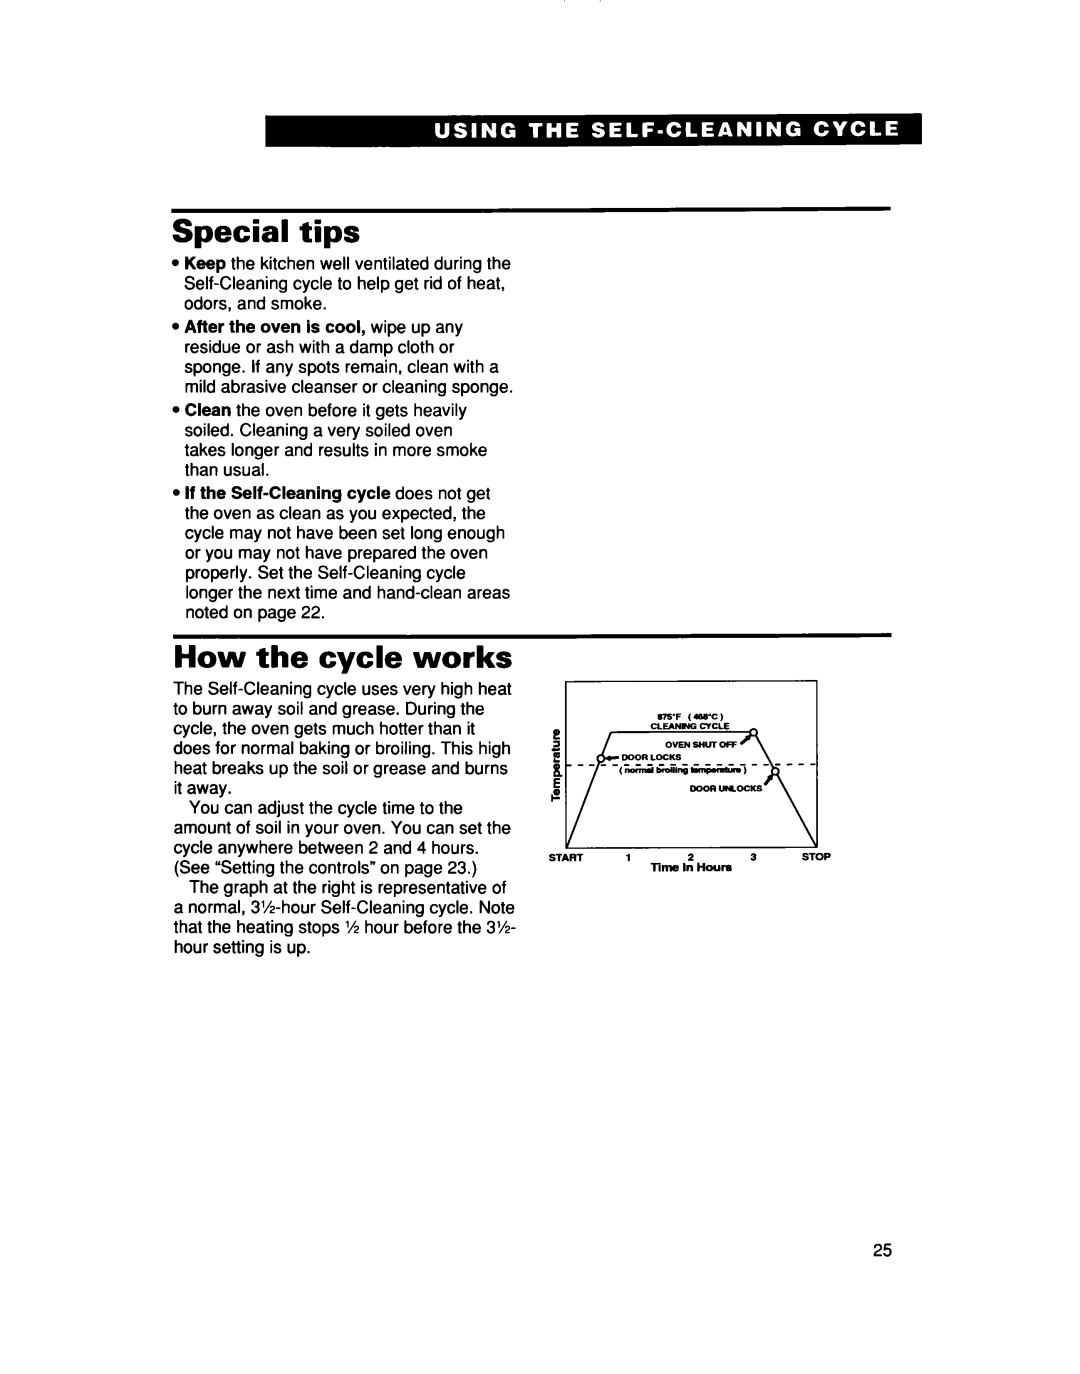 Whirlpool TER50W0D warranty Special tips, How the cycle works 